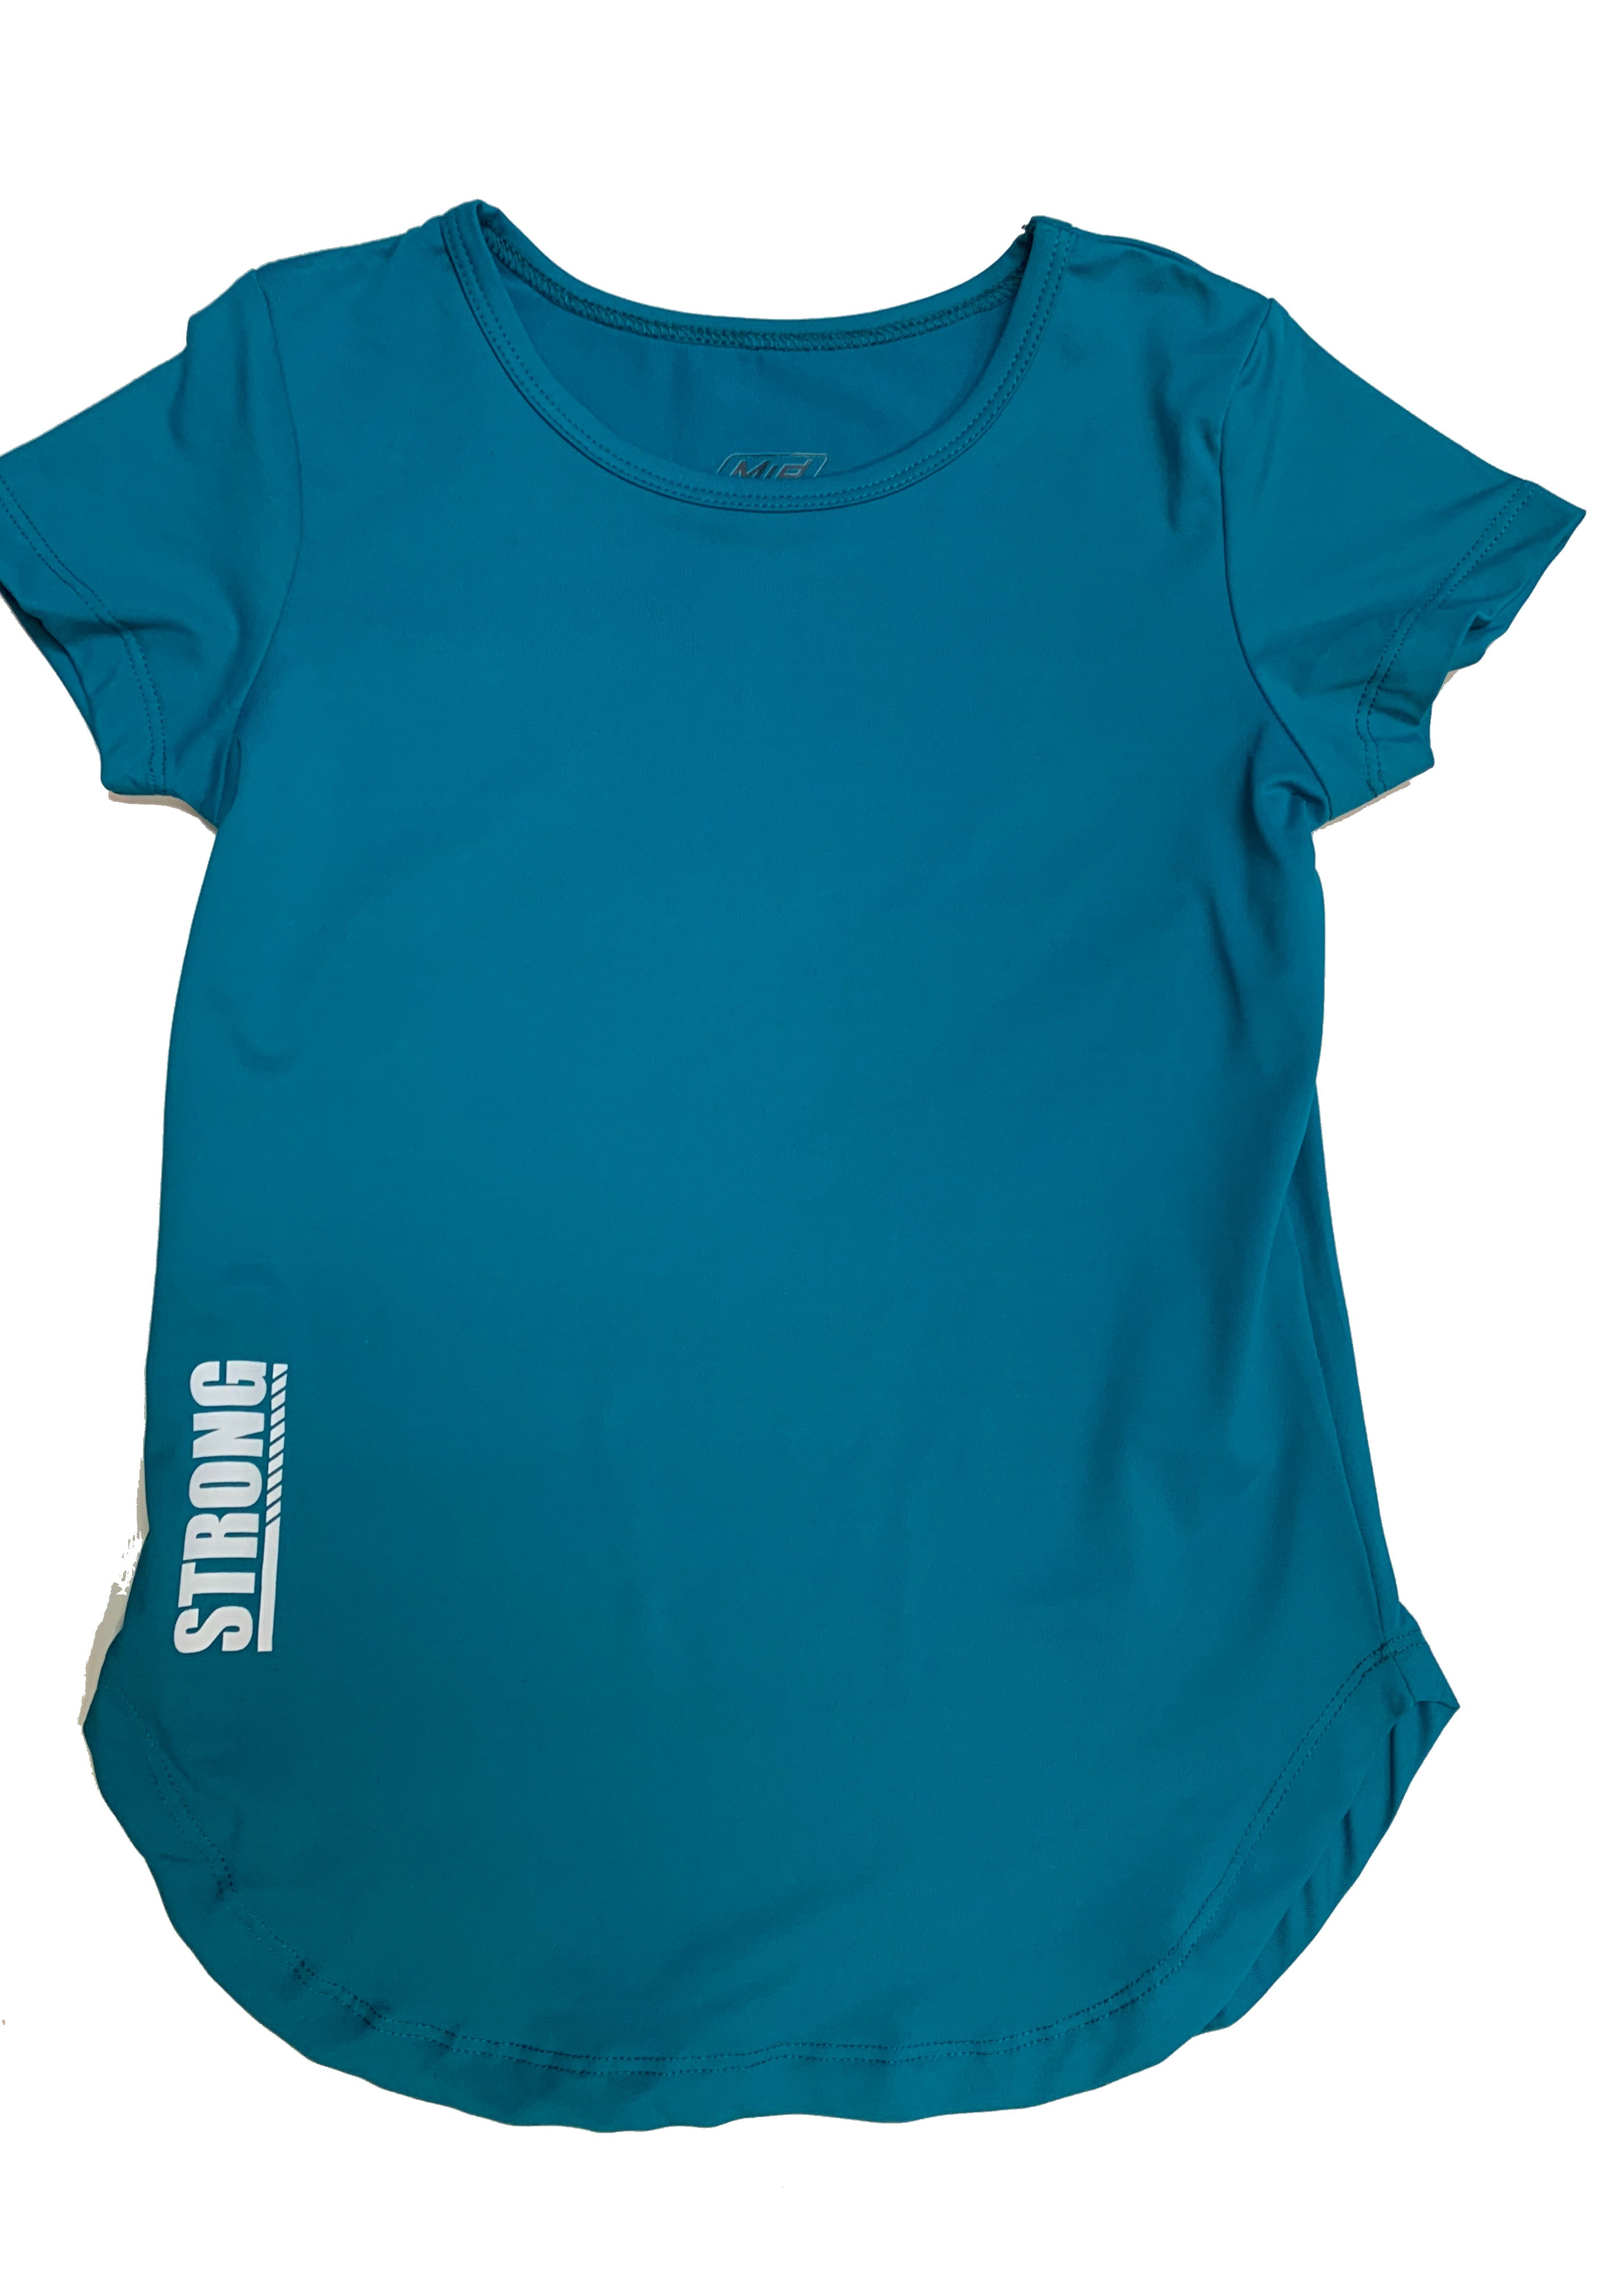 M.I.D -  chandail sport - Turquoise 9-10 ans